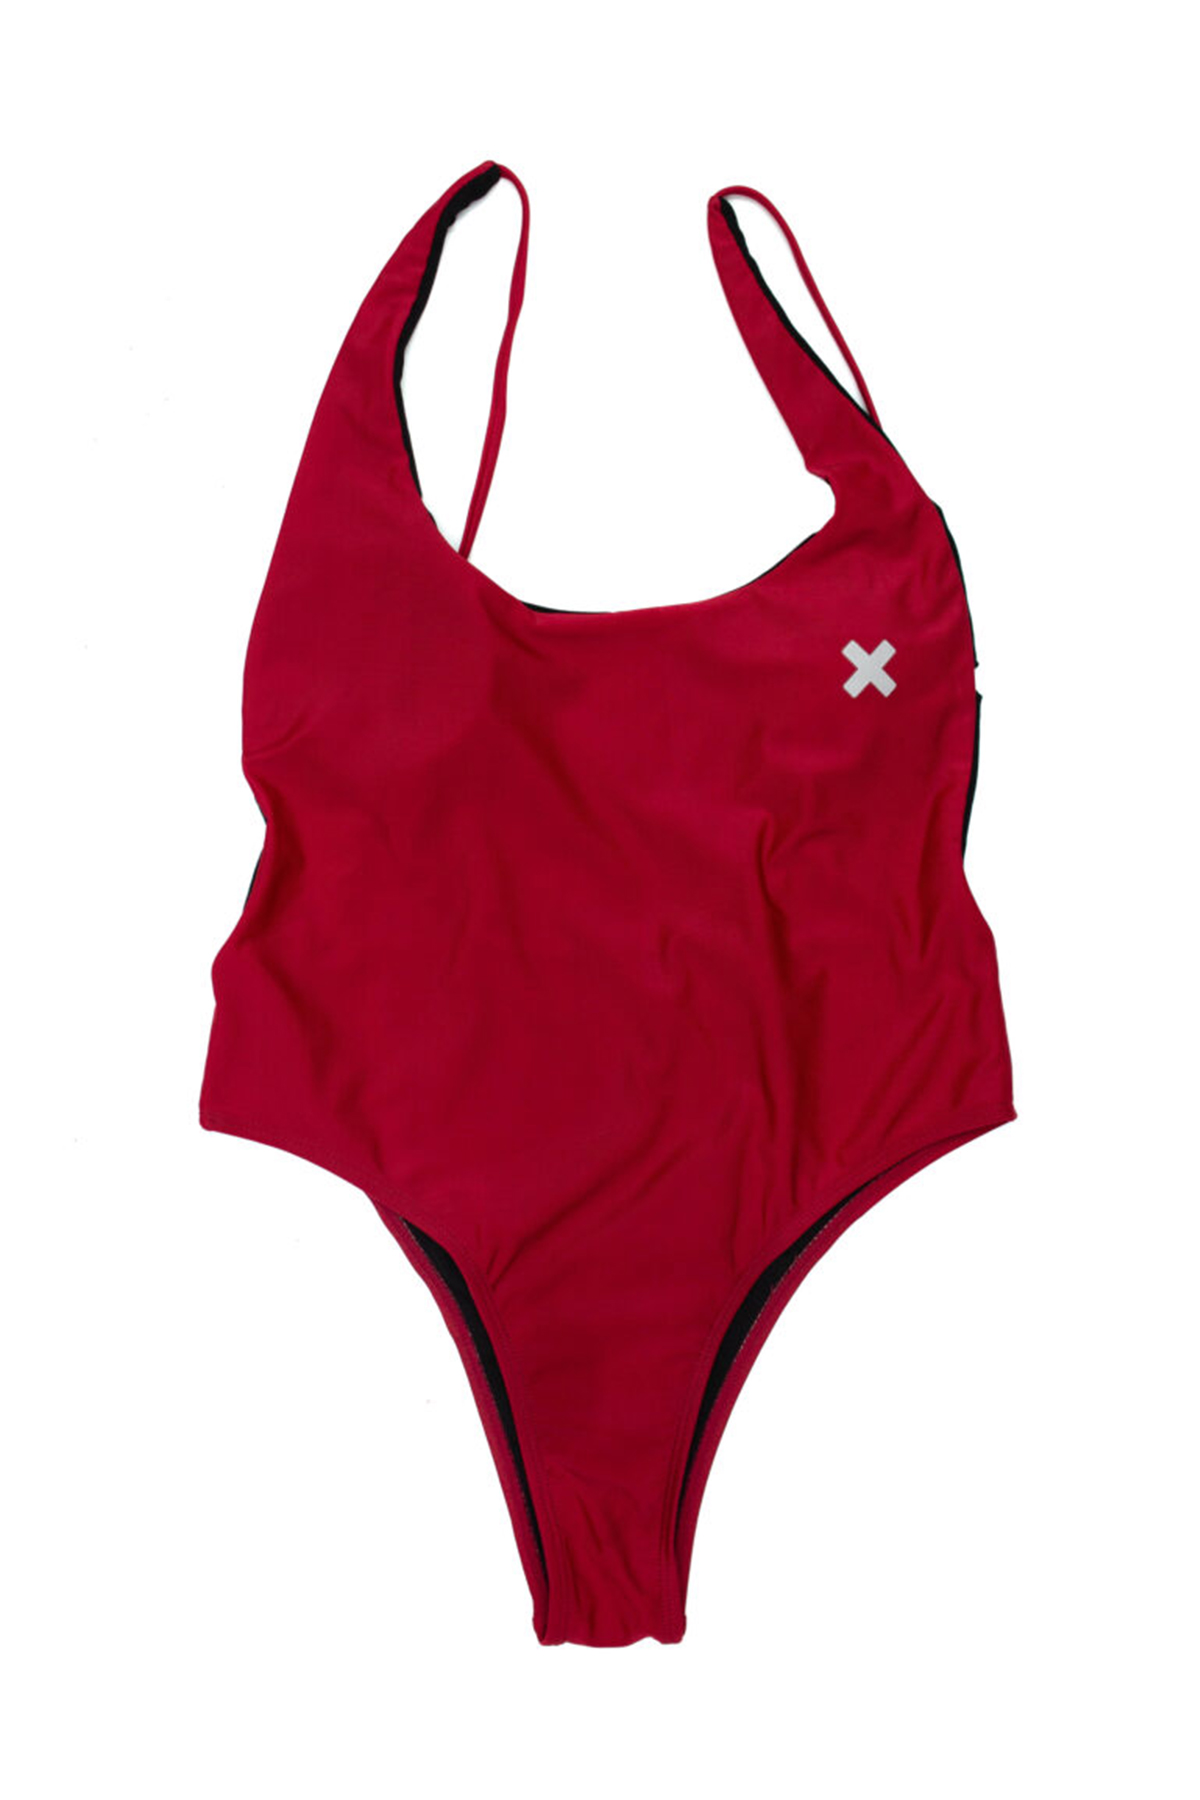 Time-Out-X-One-Piece-Bikini-Swimsuit—Red—Front